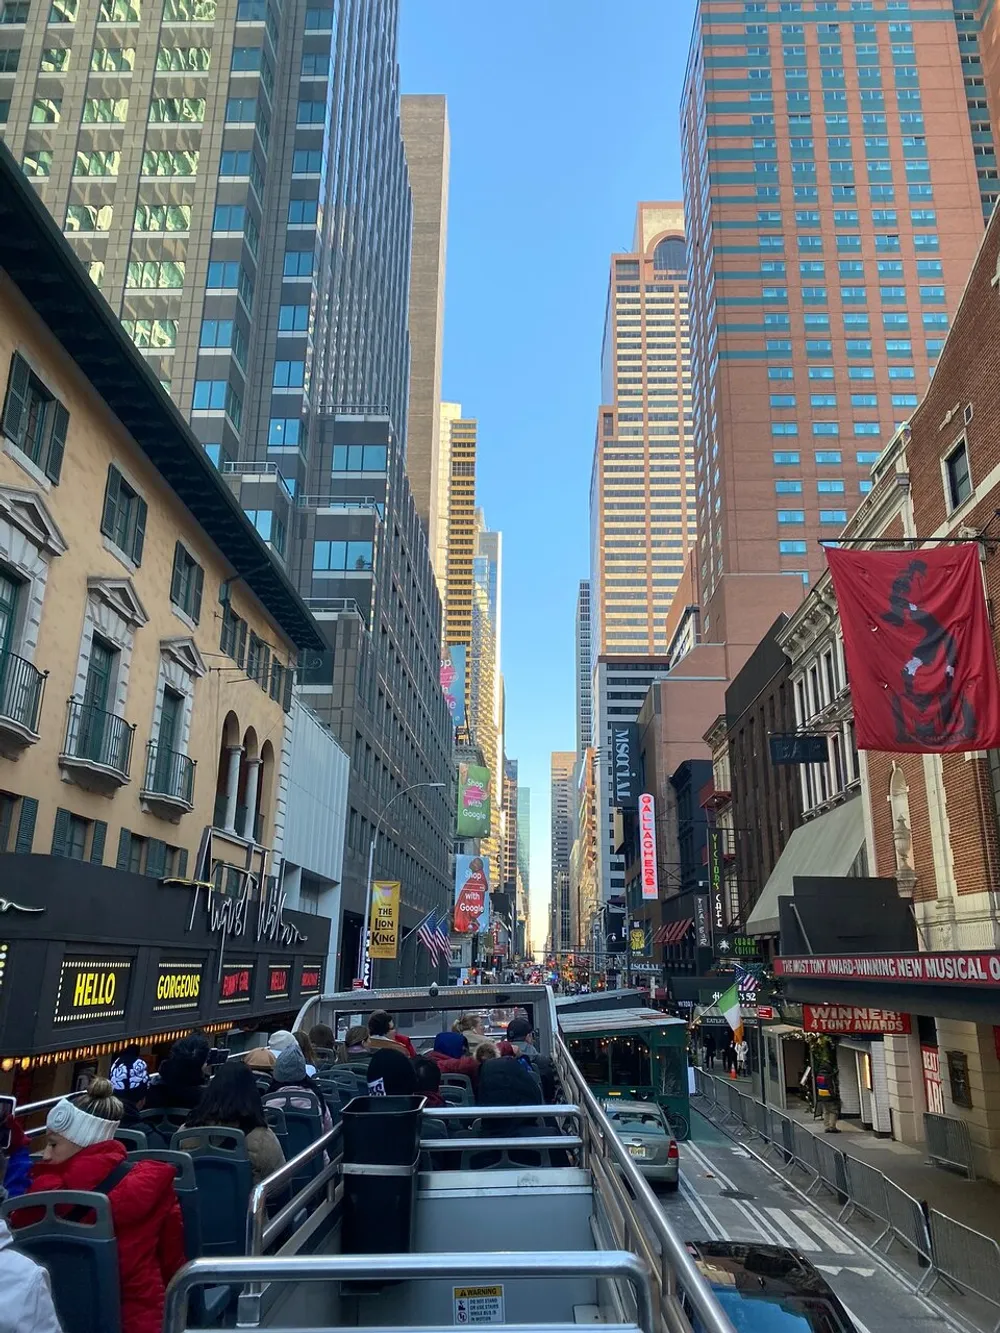 Tourists are enjoying a double-decker bus tour amidst the towering skyscrapers and bustling city life of a vibrant urban downtown